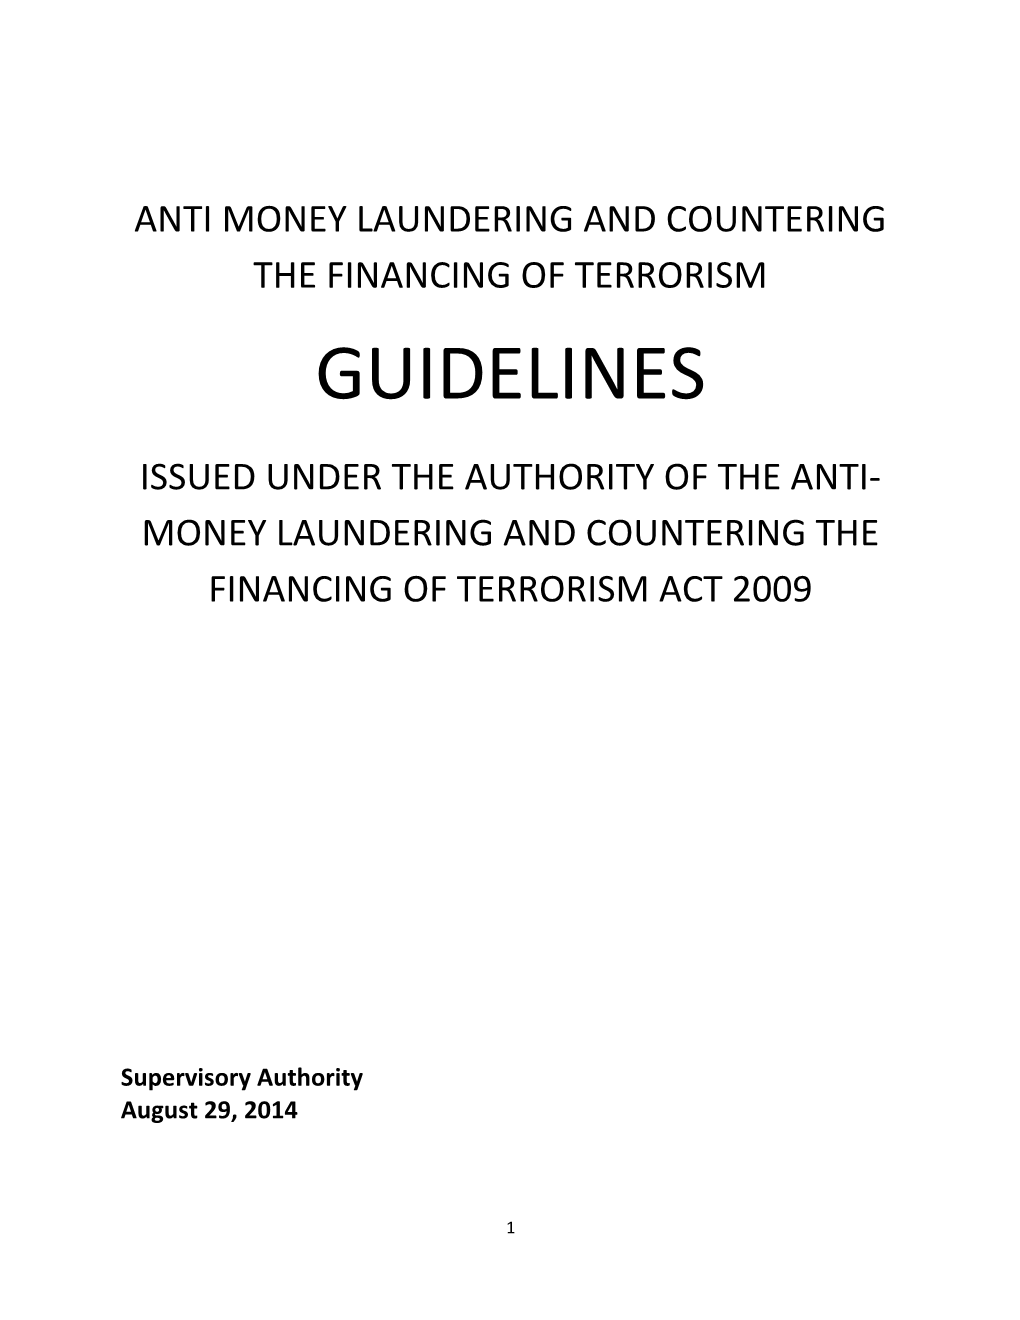 Anti Money Laundering and Countering the Financing of Terrorism